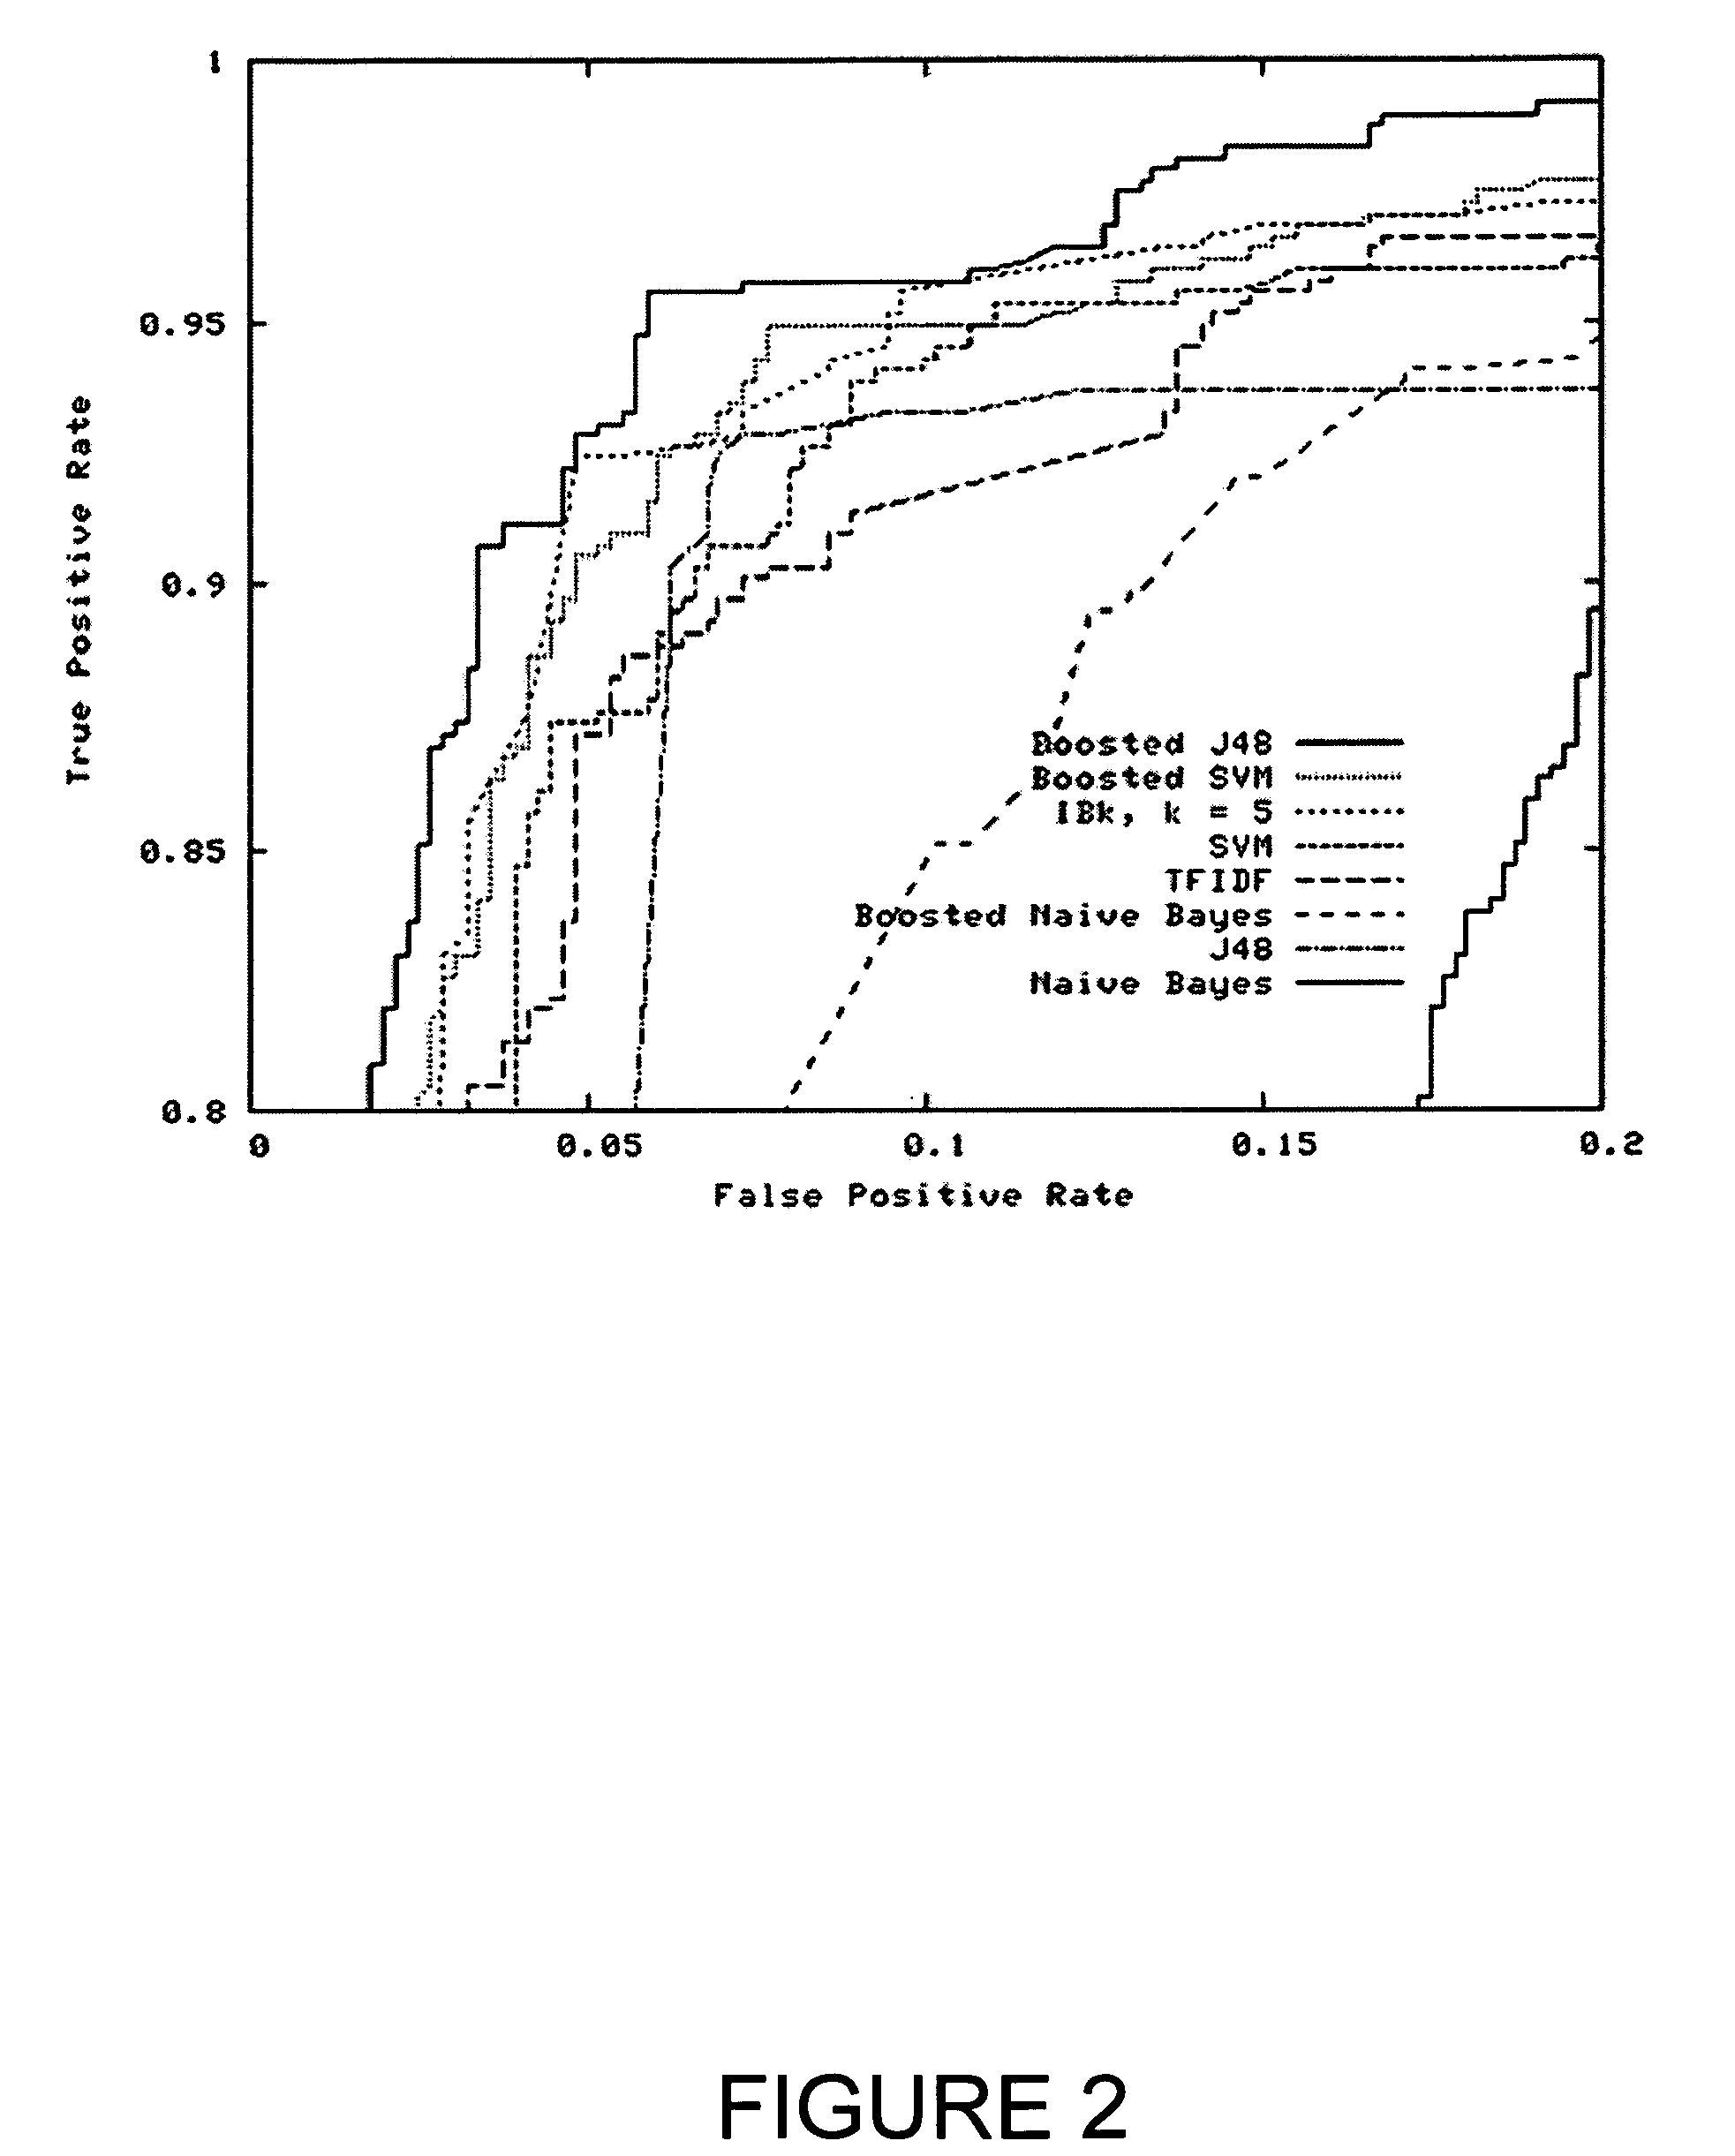 System and method for detecting malicious executable code